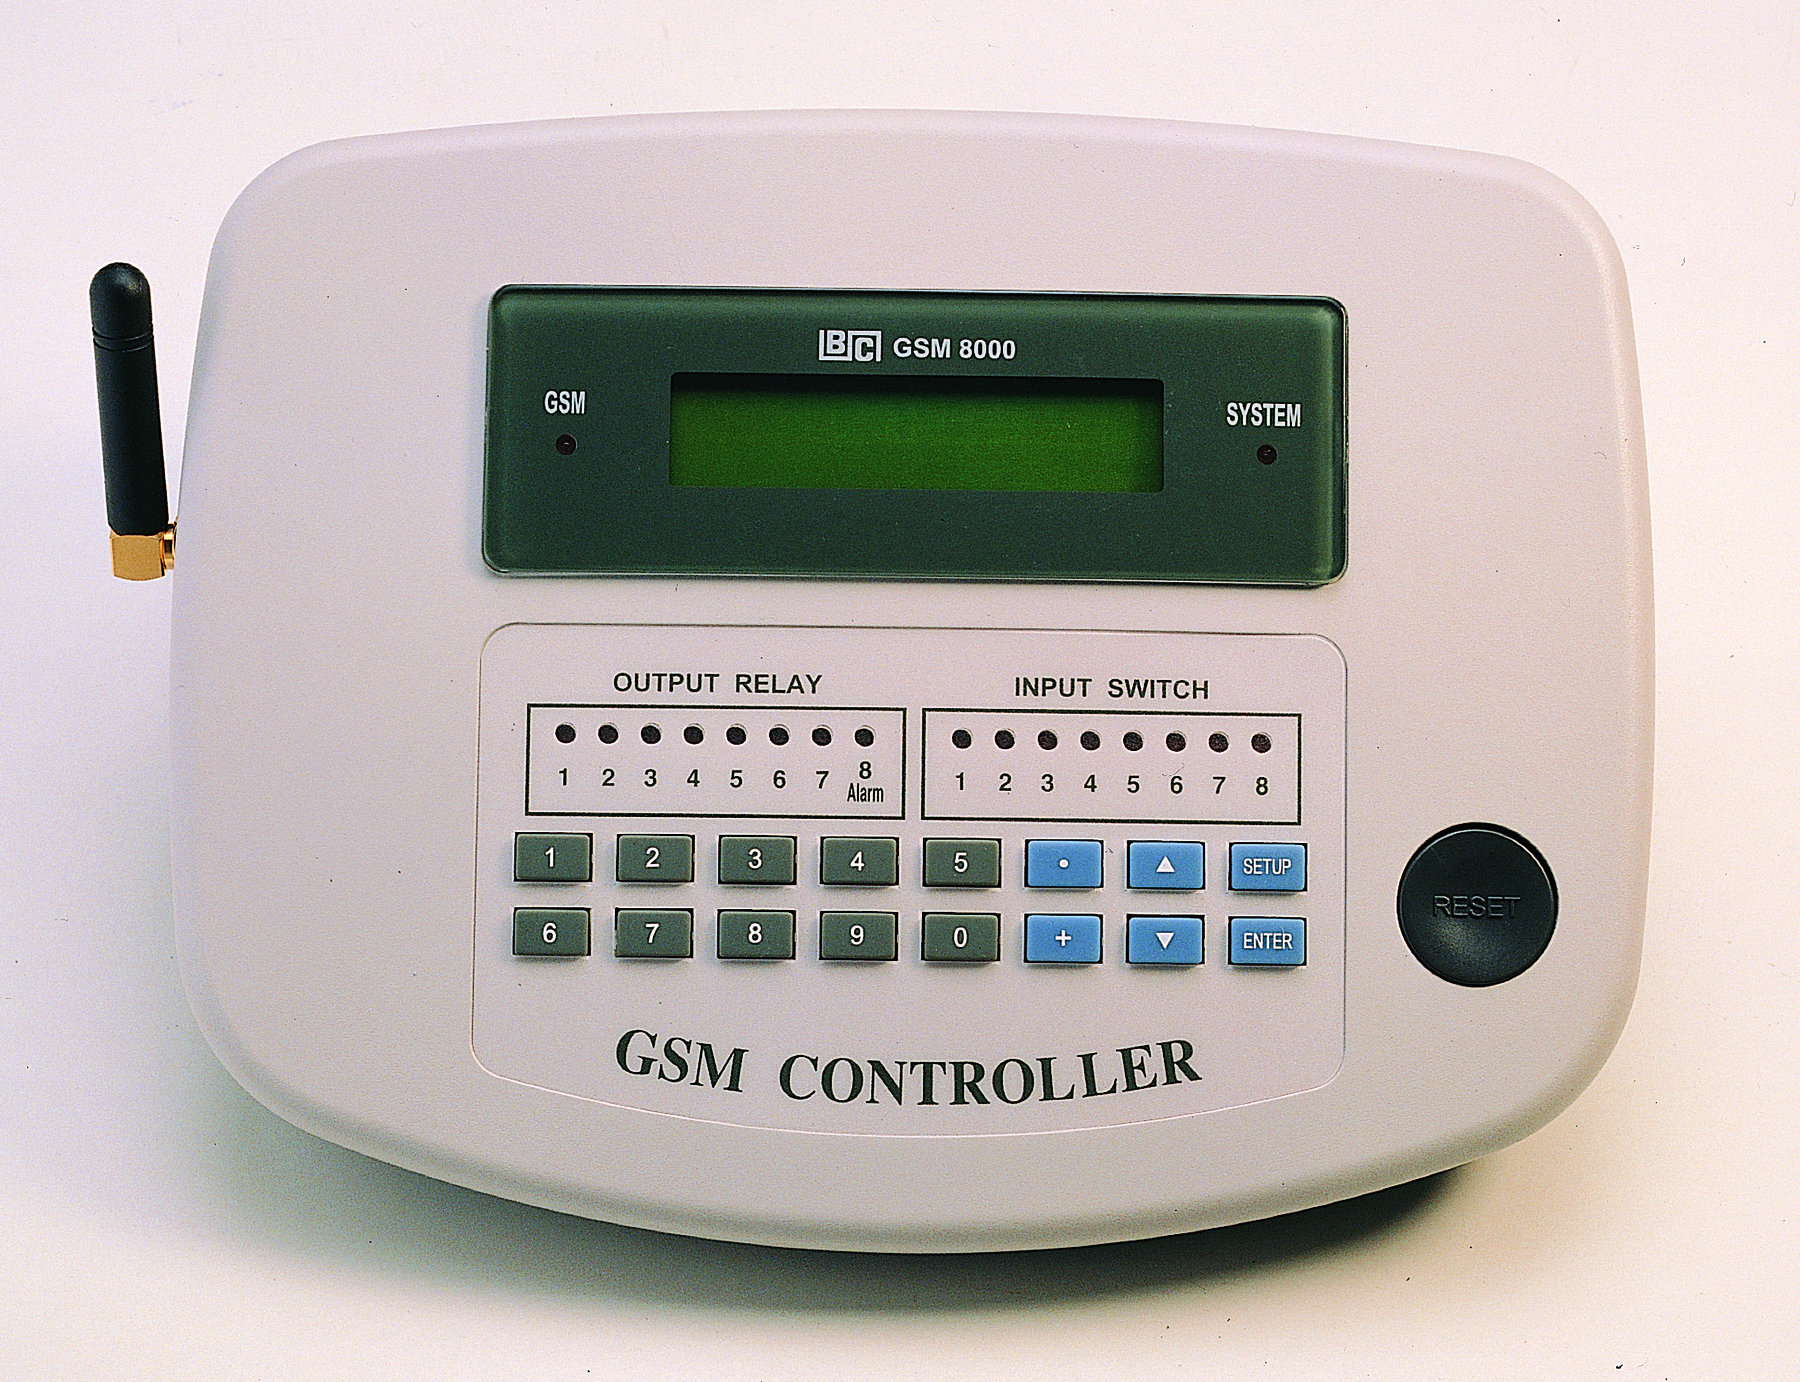 GSM8000 is mainly used for sending alarm SMS and process values to mobile phone.